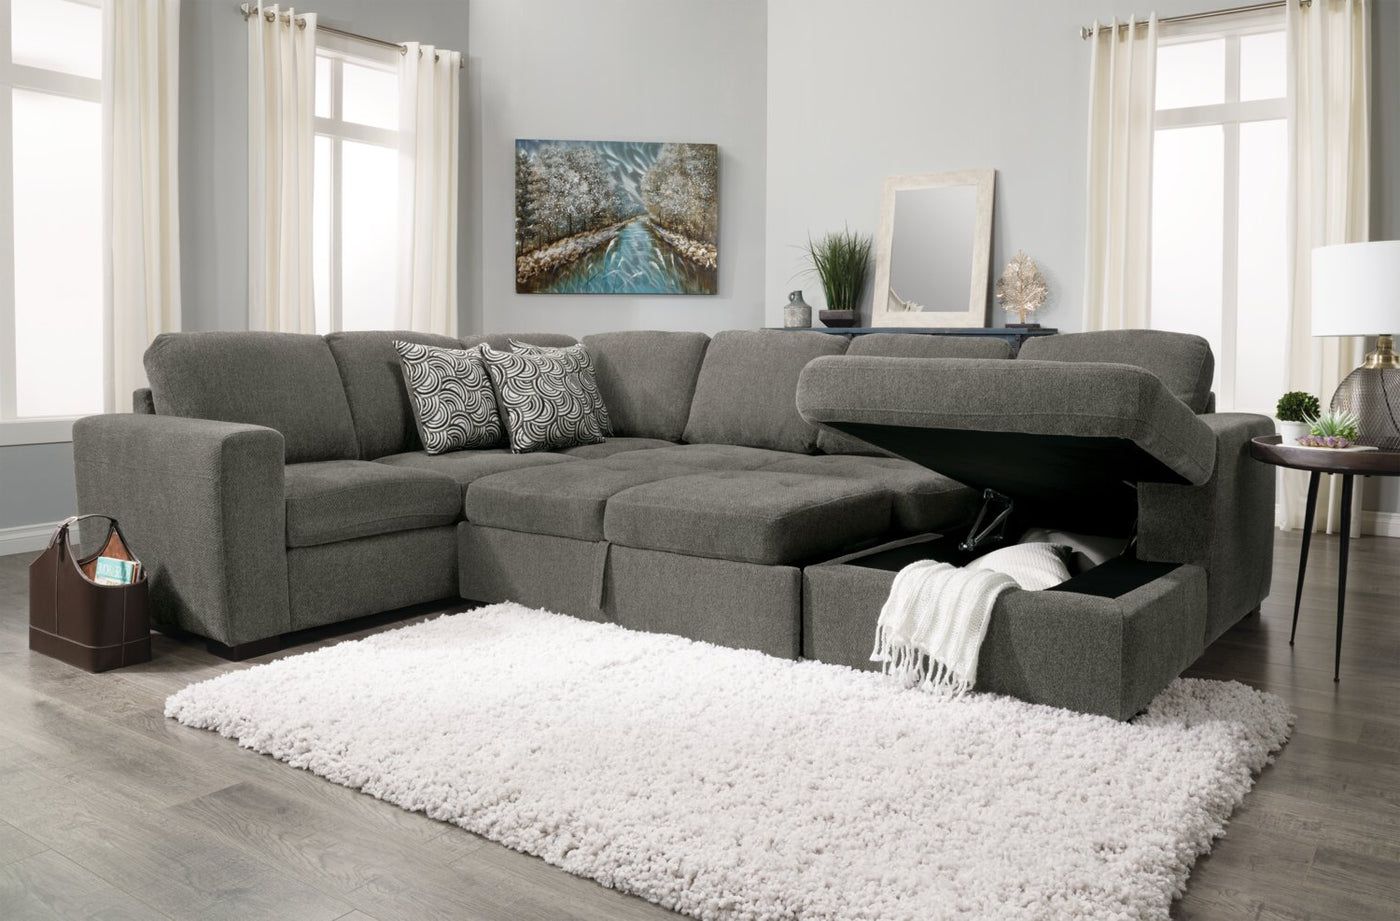 Izzy 4 Piece Chenille Sleeper Sectional With Left Facing Storage Ch Throughout Left Or Right Facing Sleeper Sectionals (View 15 of 20)